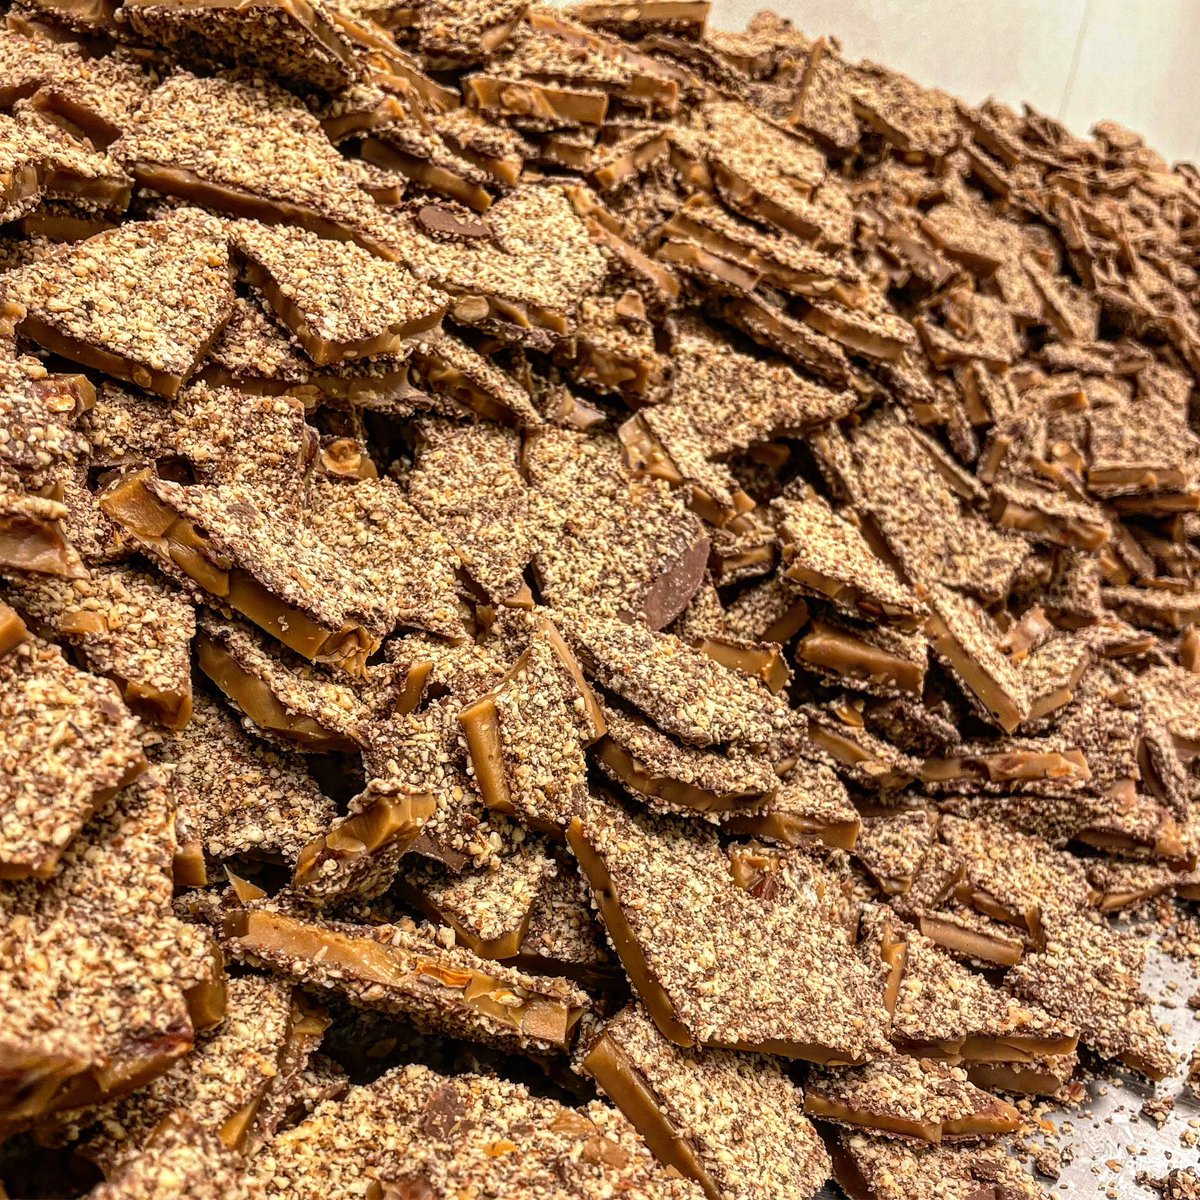 Milk chocolate toffee mountain is looking really good today! 🤩